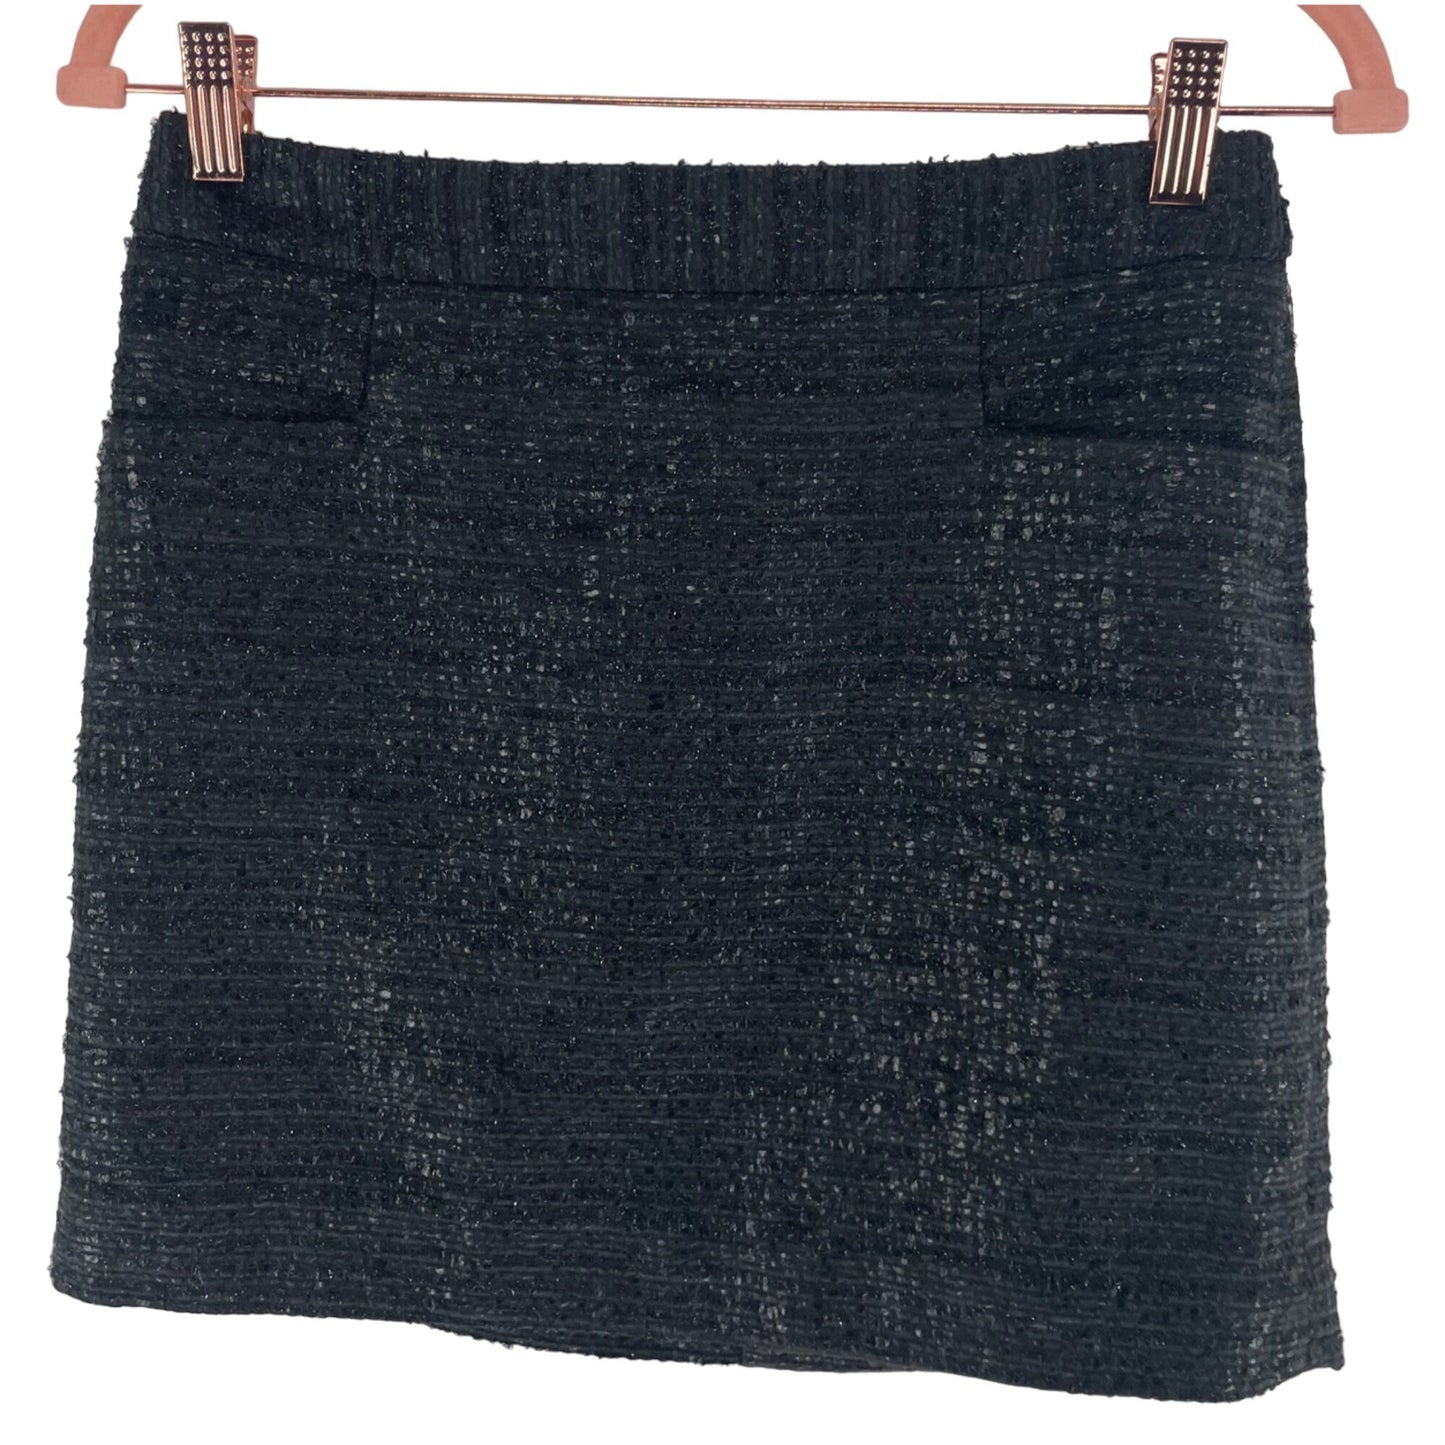 The Limited Women's Size 0 Black Sparkly Tweed Mink Skirt